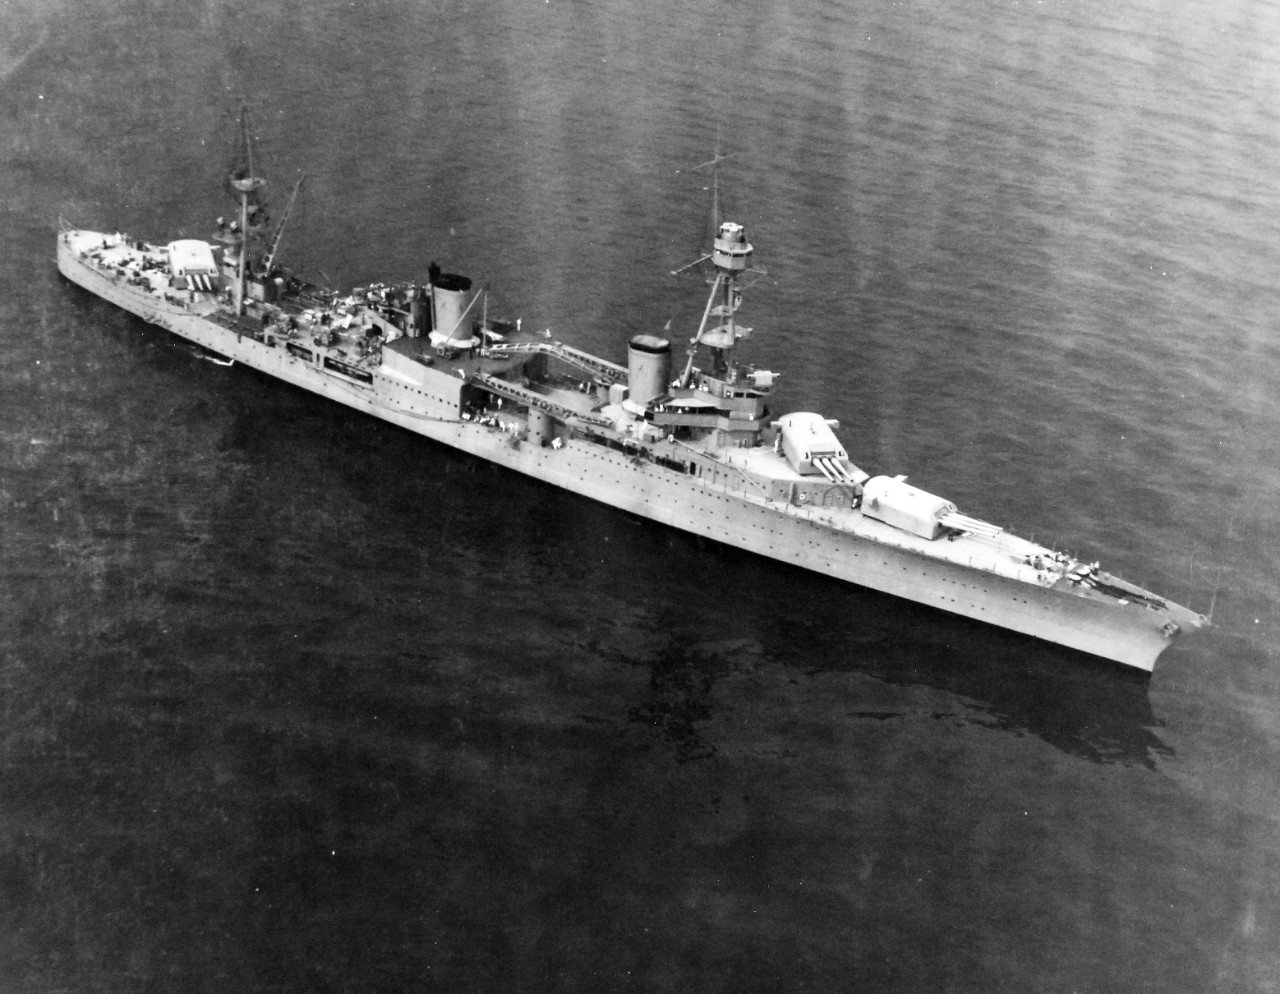 <p>80-CF-21337-3: USS Houston (CA 30), starboard side view, June 27, 1931. U.S. Navy Photograph, now in the collections of the National Archives. (2015/6/16).</p>
